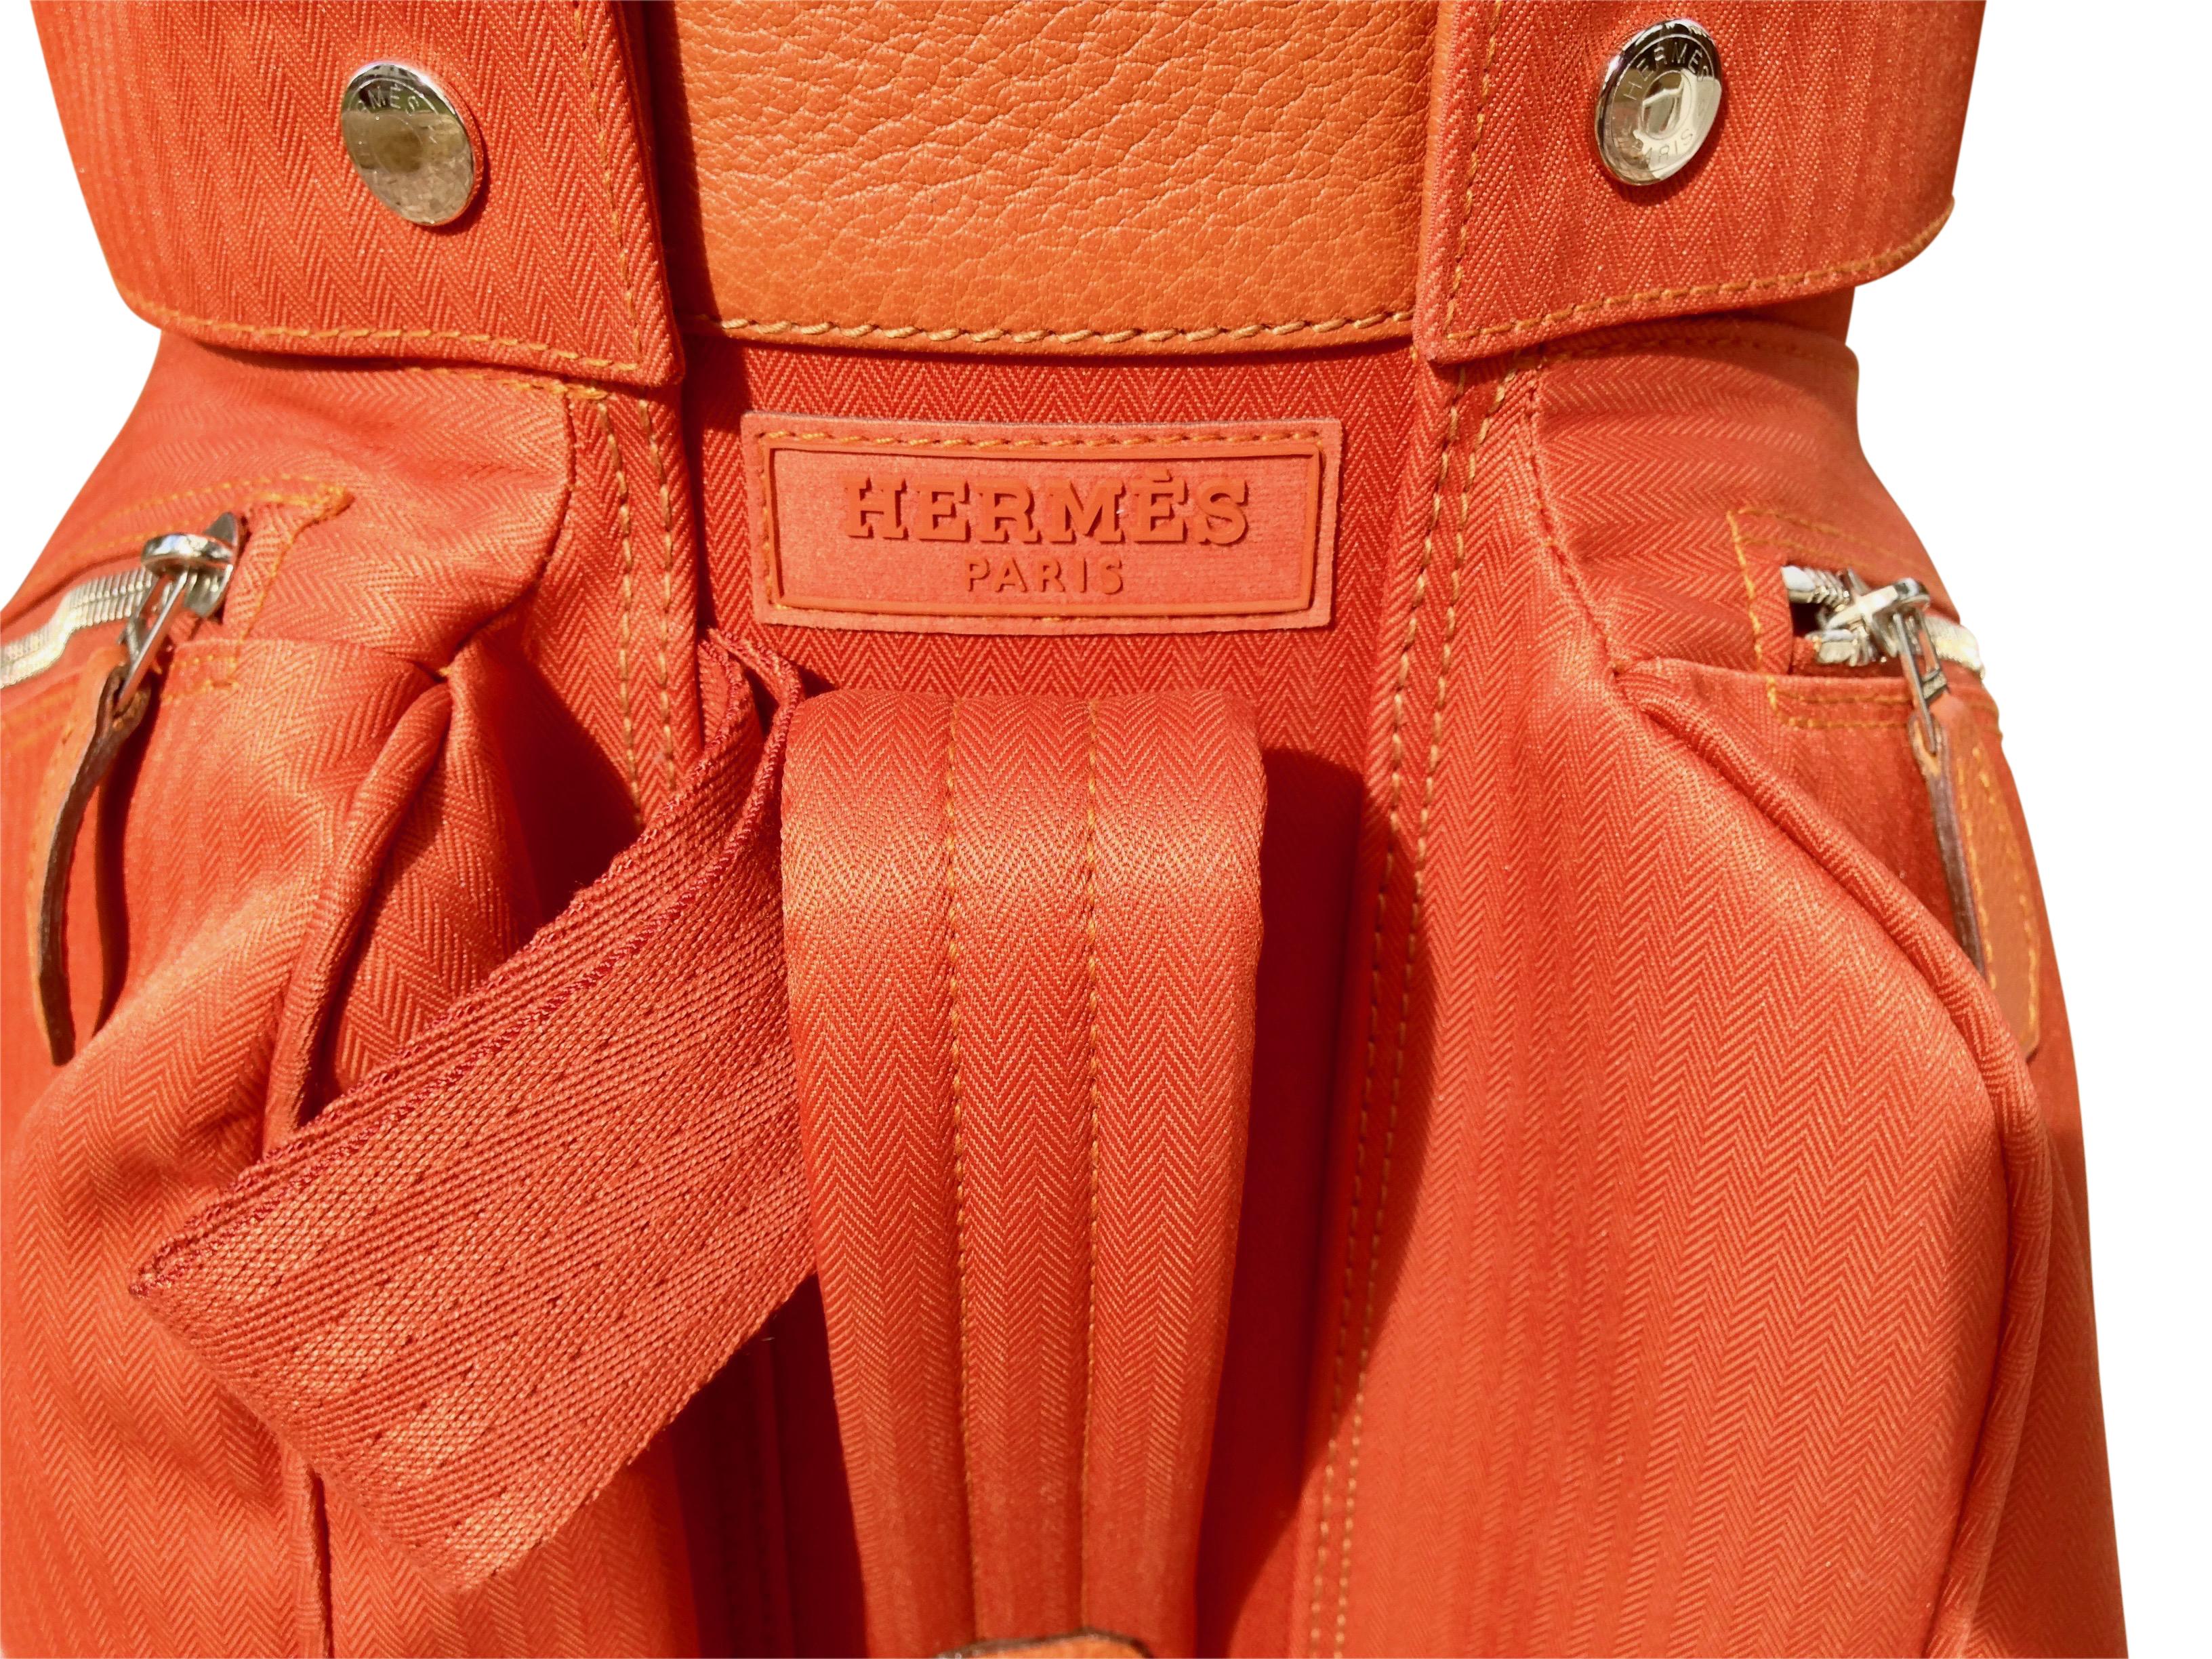 This is a rare Hermès Golf bag, limited edition in a gorgeous Tangerine orange color with Chevron fabric and buffalo leather. It comes with a shoulder strap and a giant Hermes dust bag. 
This bag was purchased in the Paris Hermès store by the